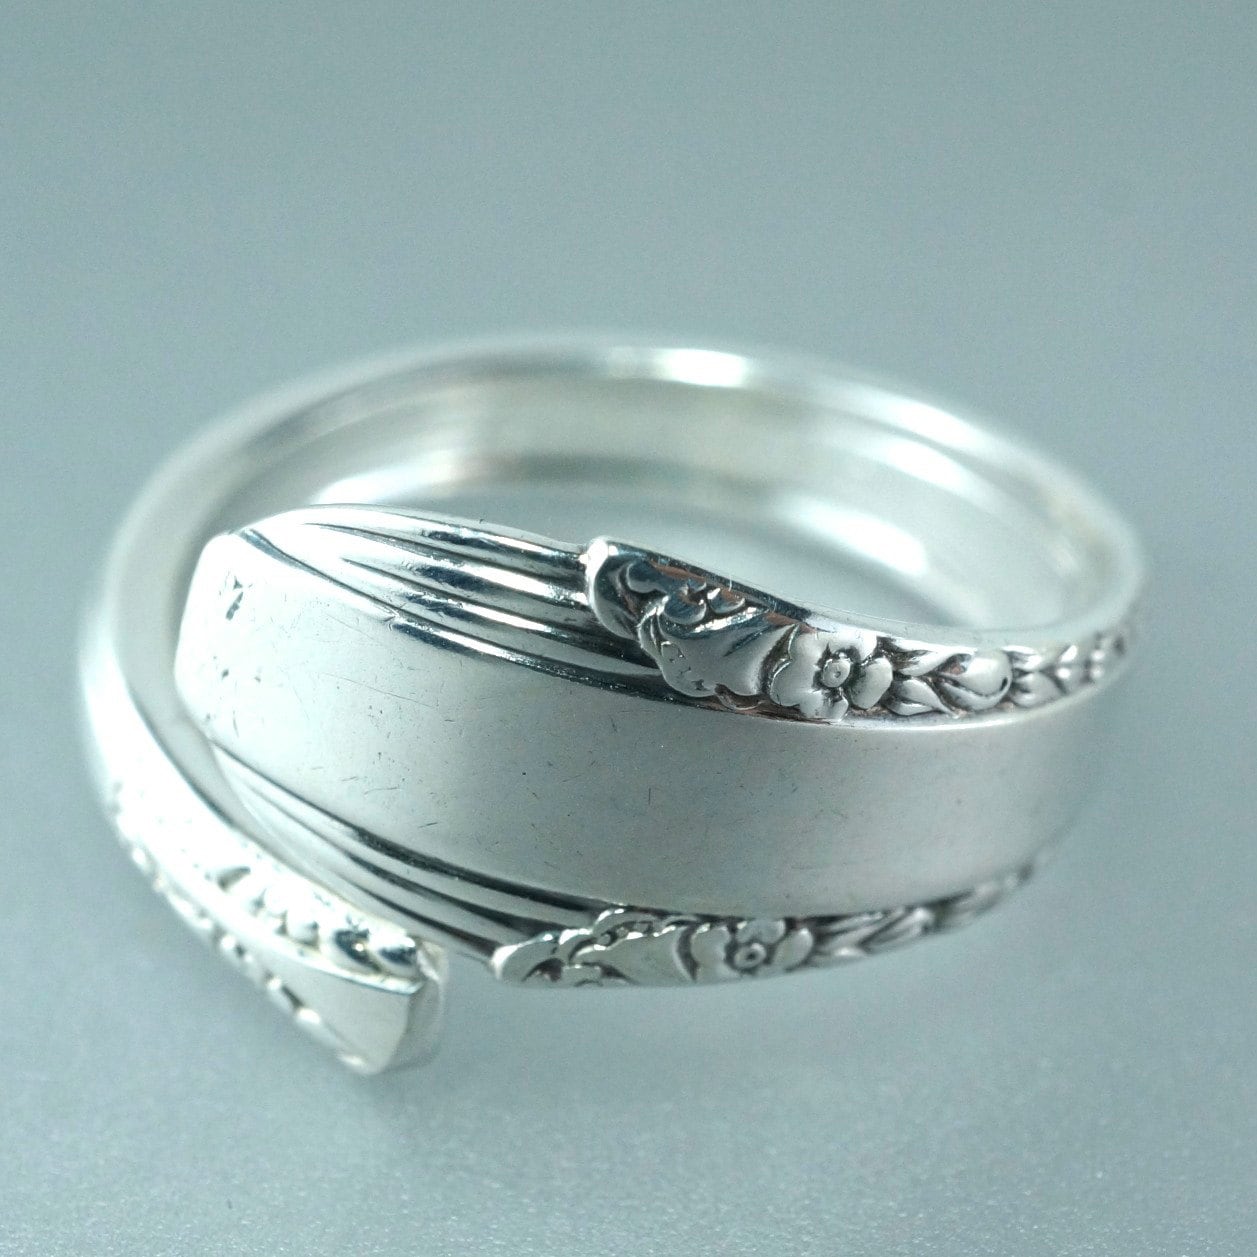 LARGE SILVER SPOON ring. Sterling Spoon Ring. Mens Silver